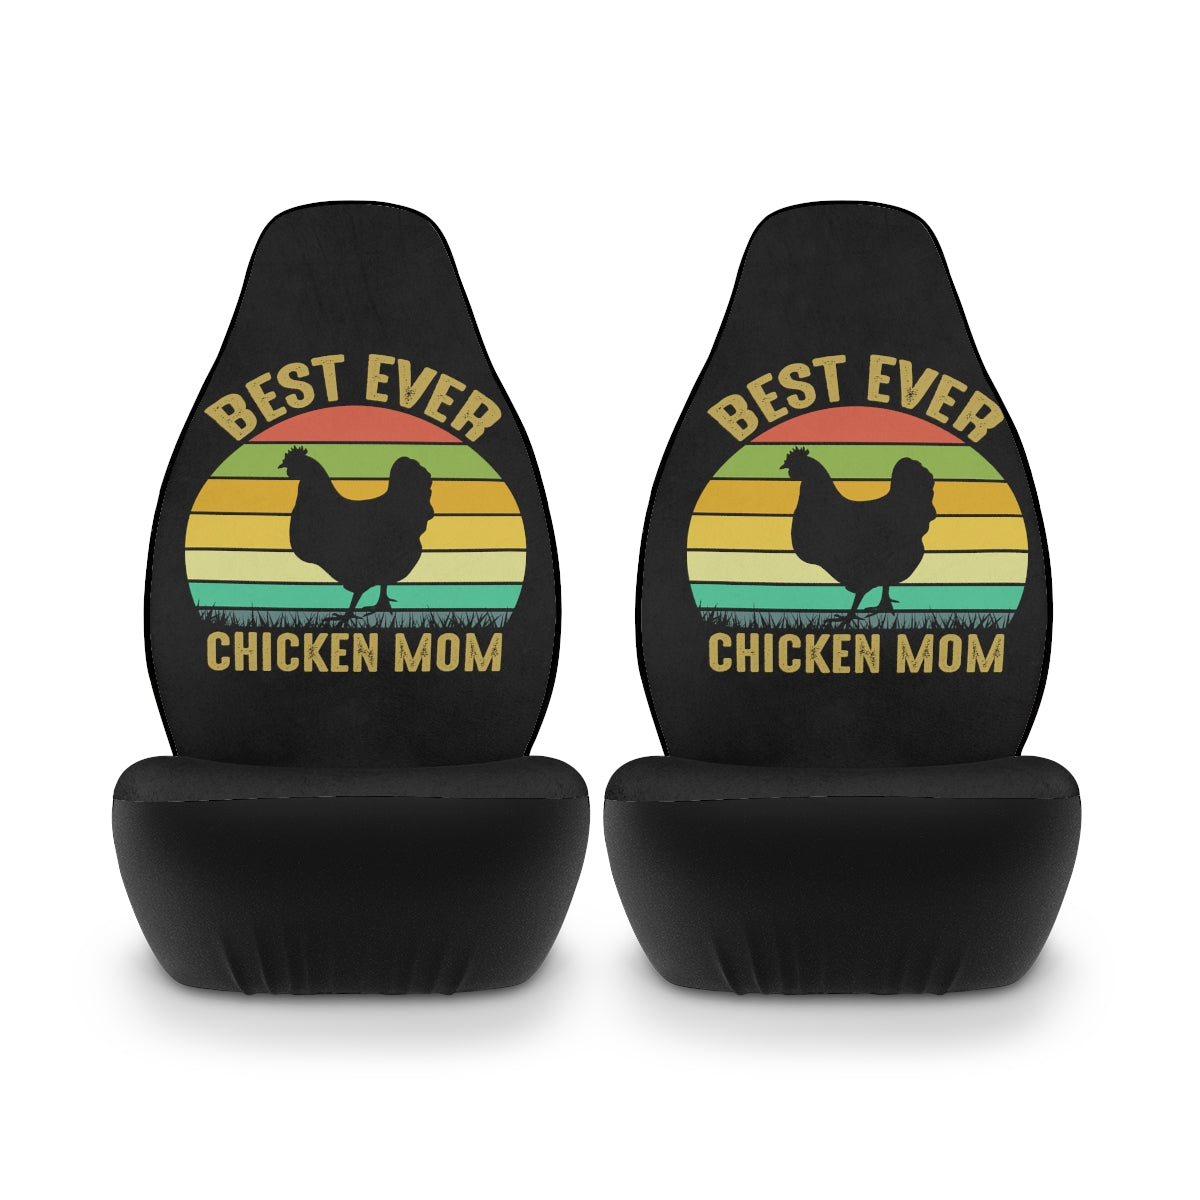 Best Ever Chicken Mom Polyester Car Seat Covers For Chicken Mom Gift For Her Chicken Lovers